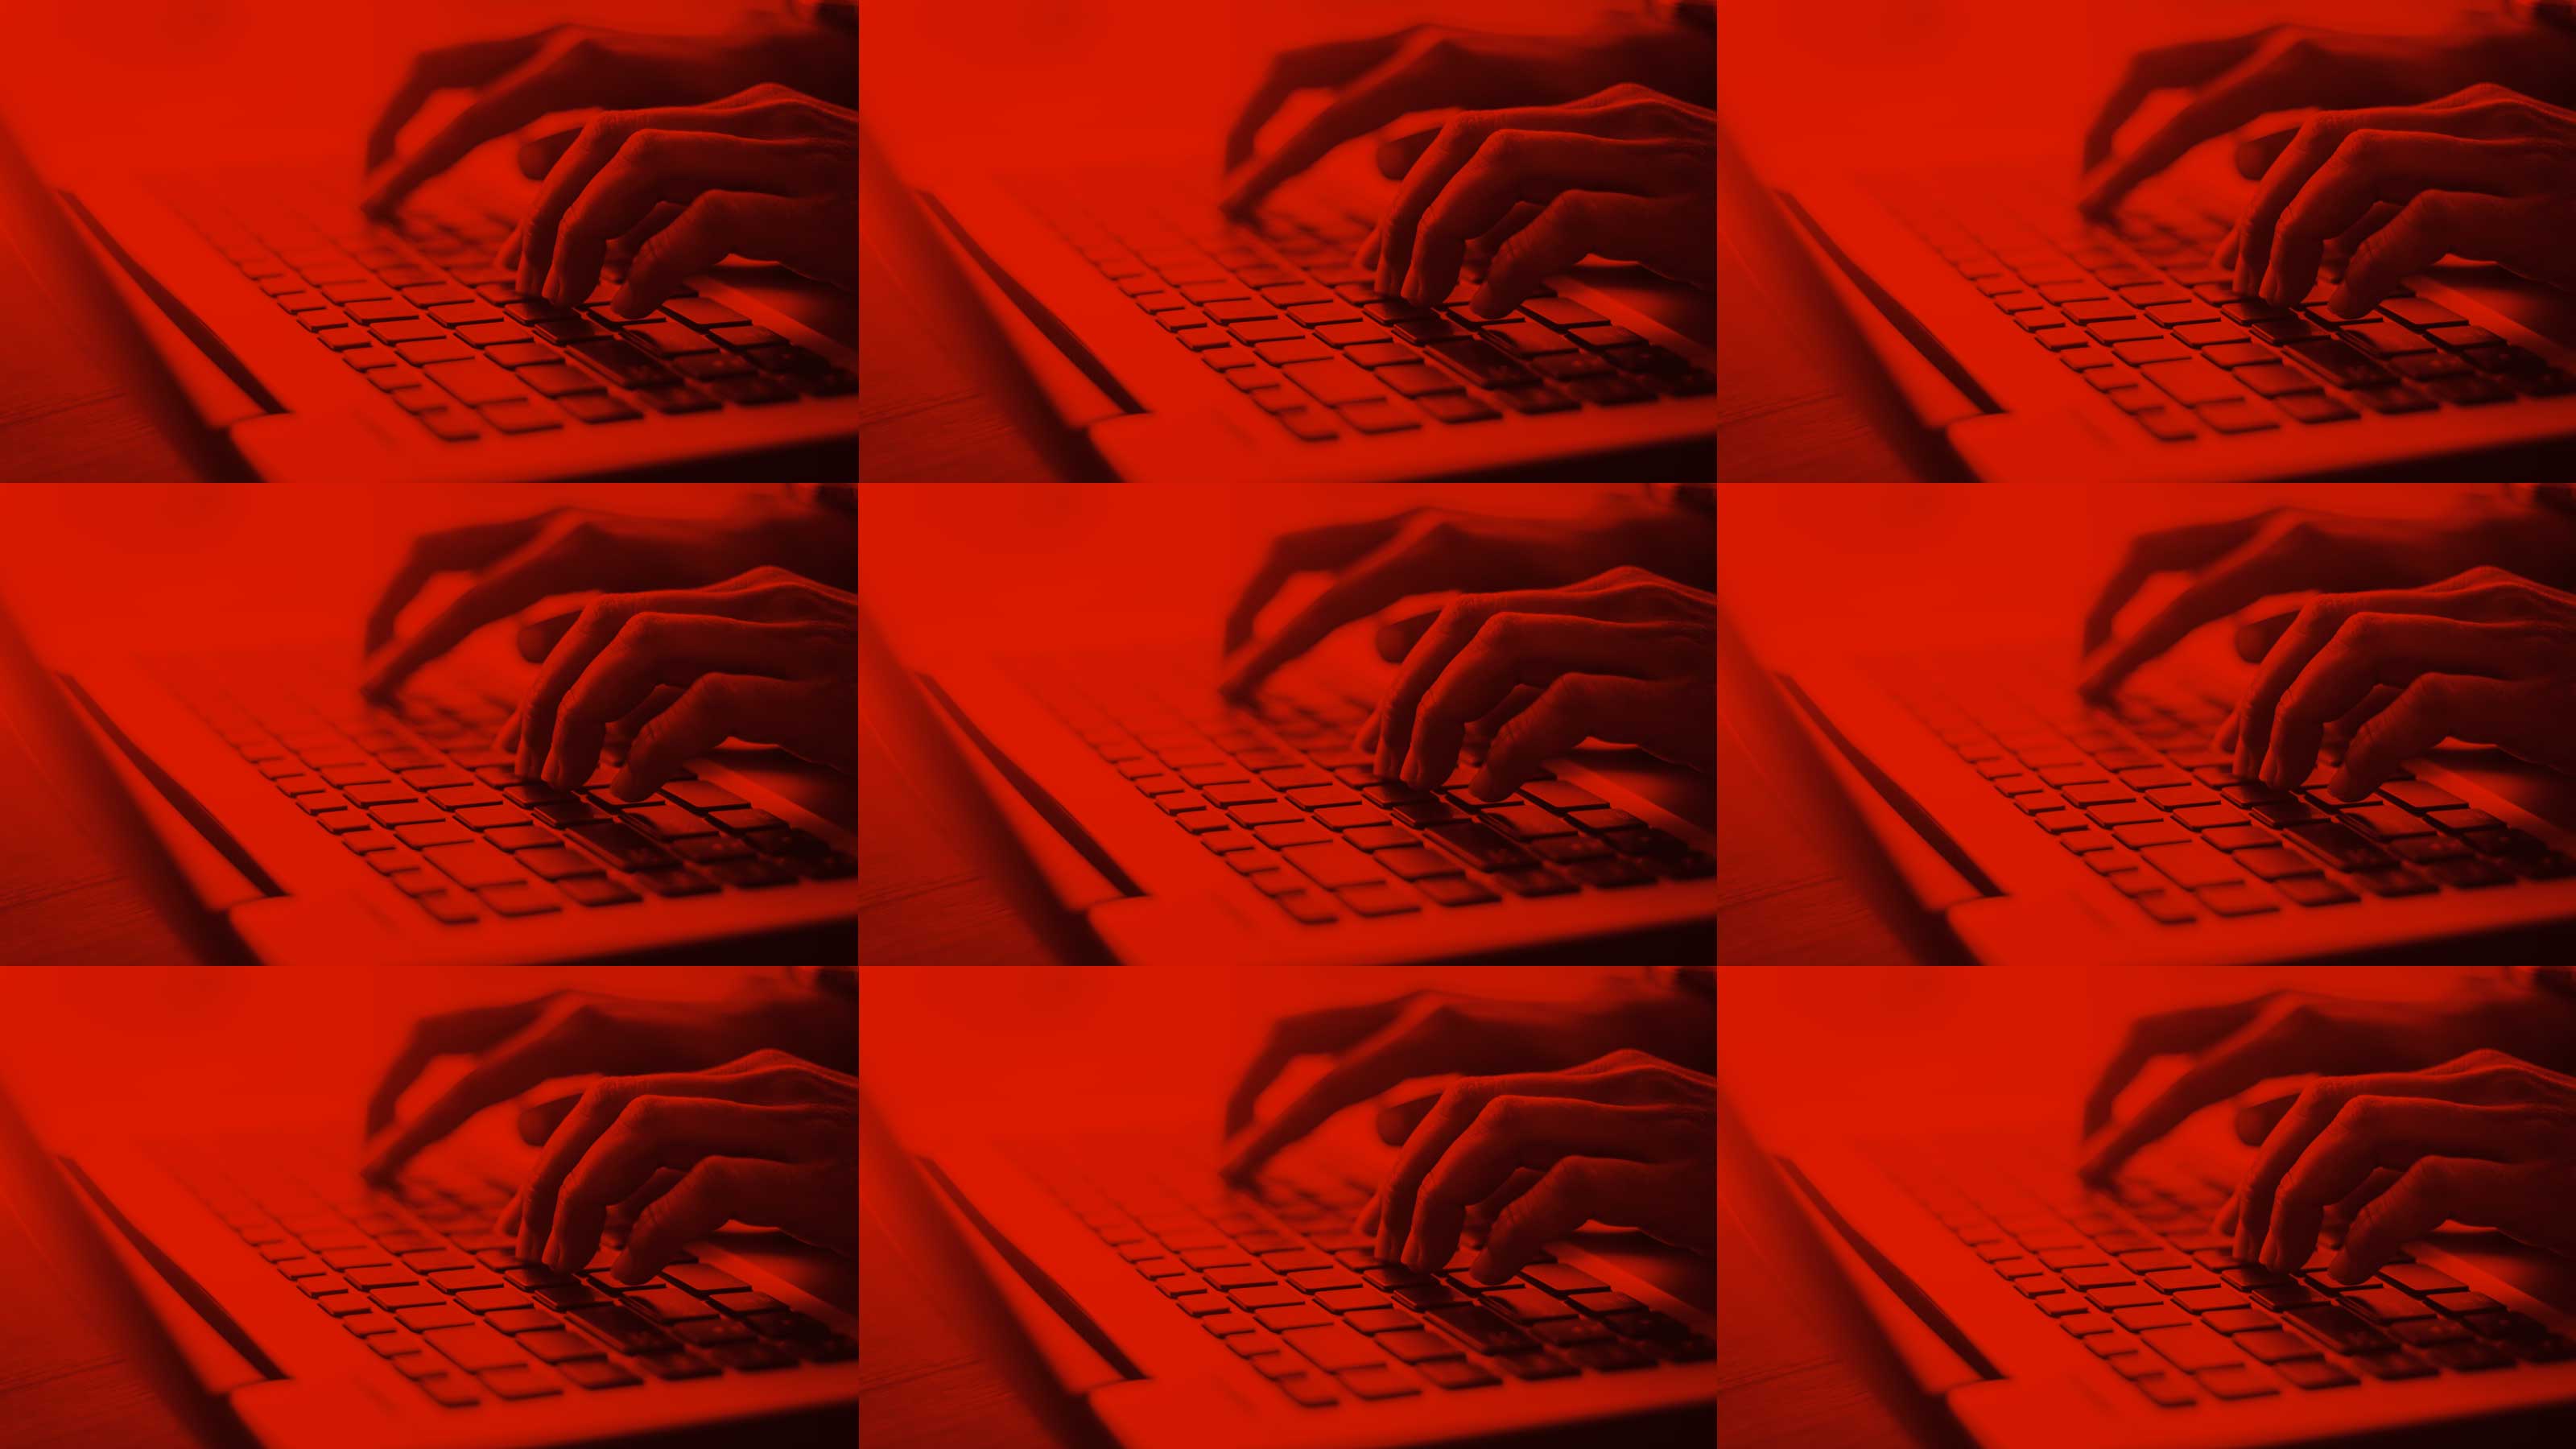 A gridded image showing hands typing on keyboards